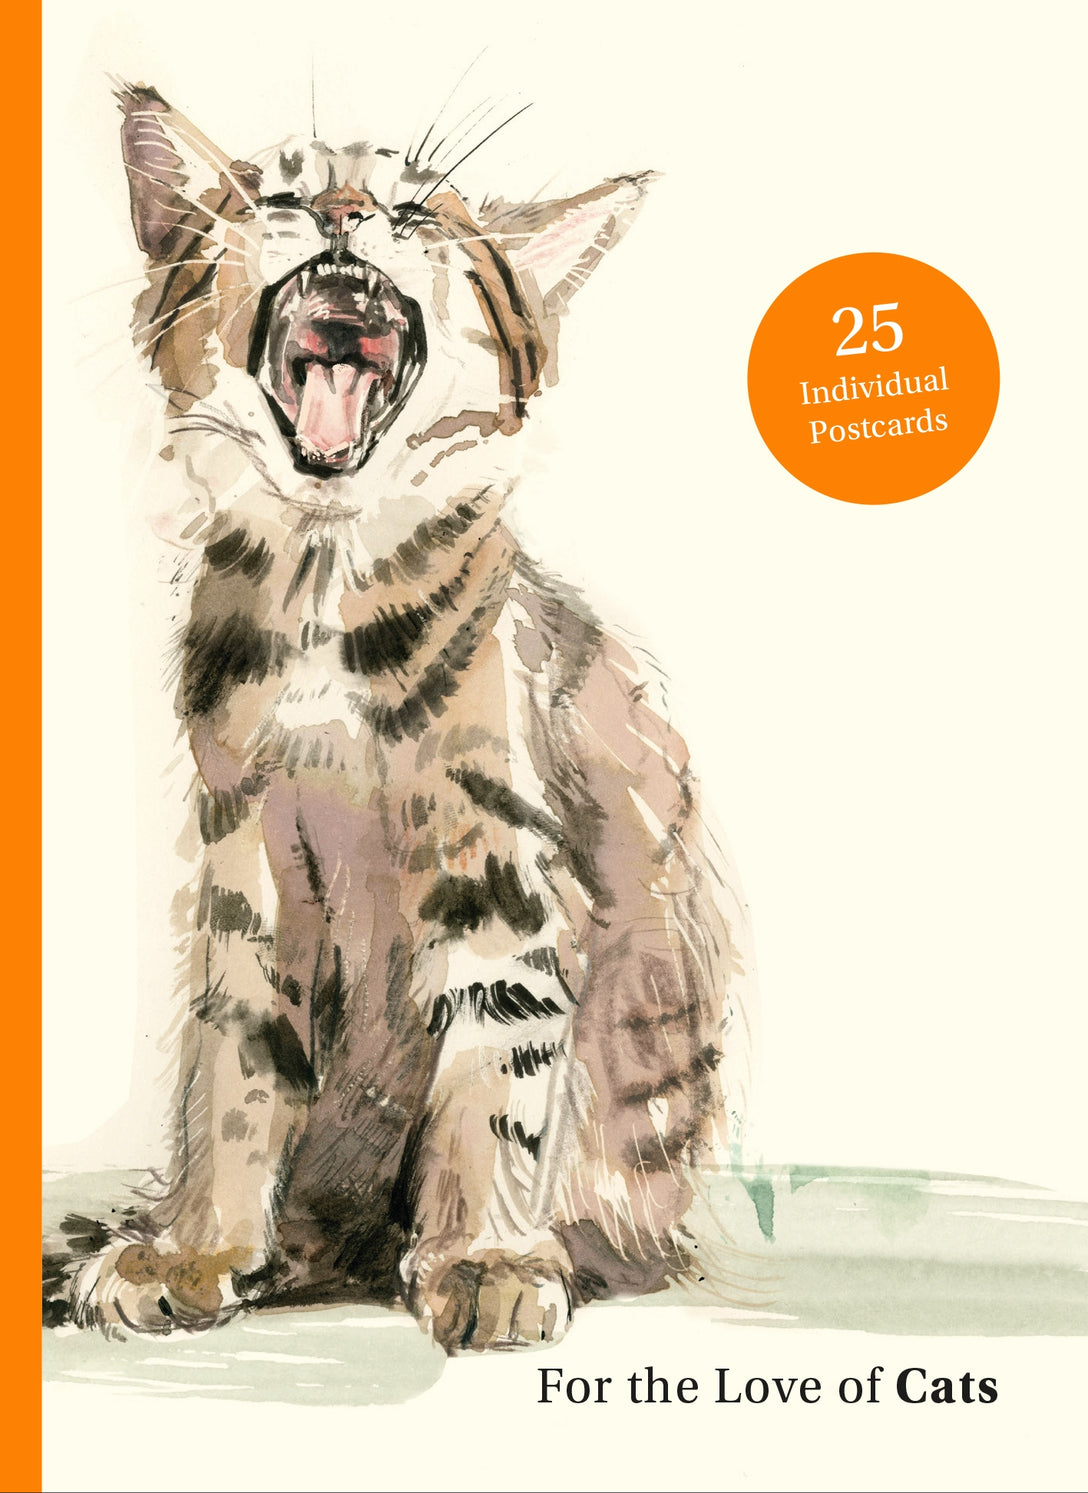 For the Love of Cats: 25 Postcards by Ana Sampson